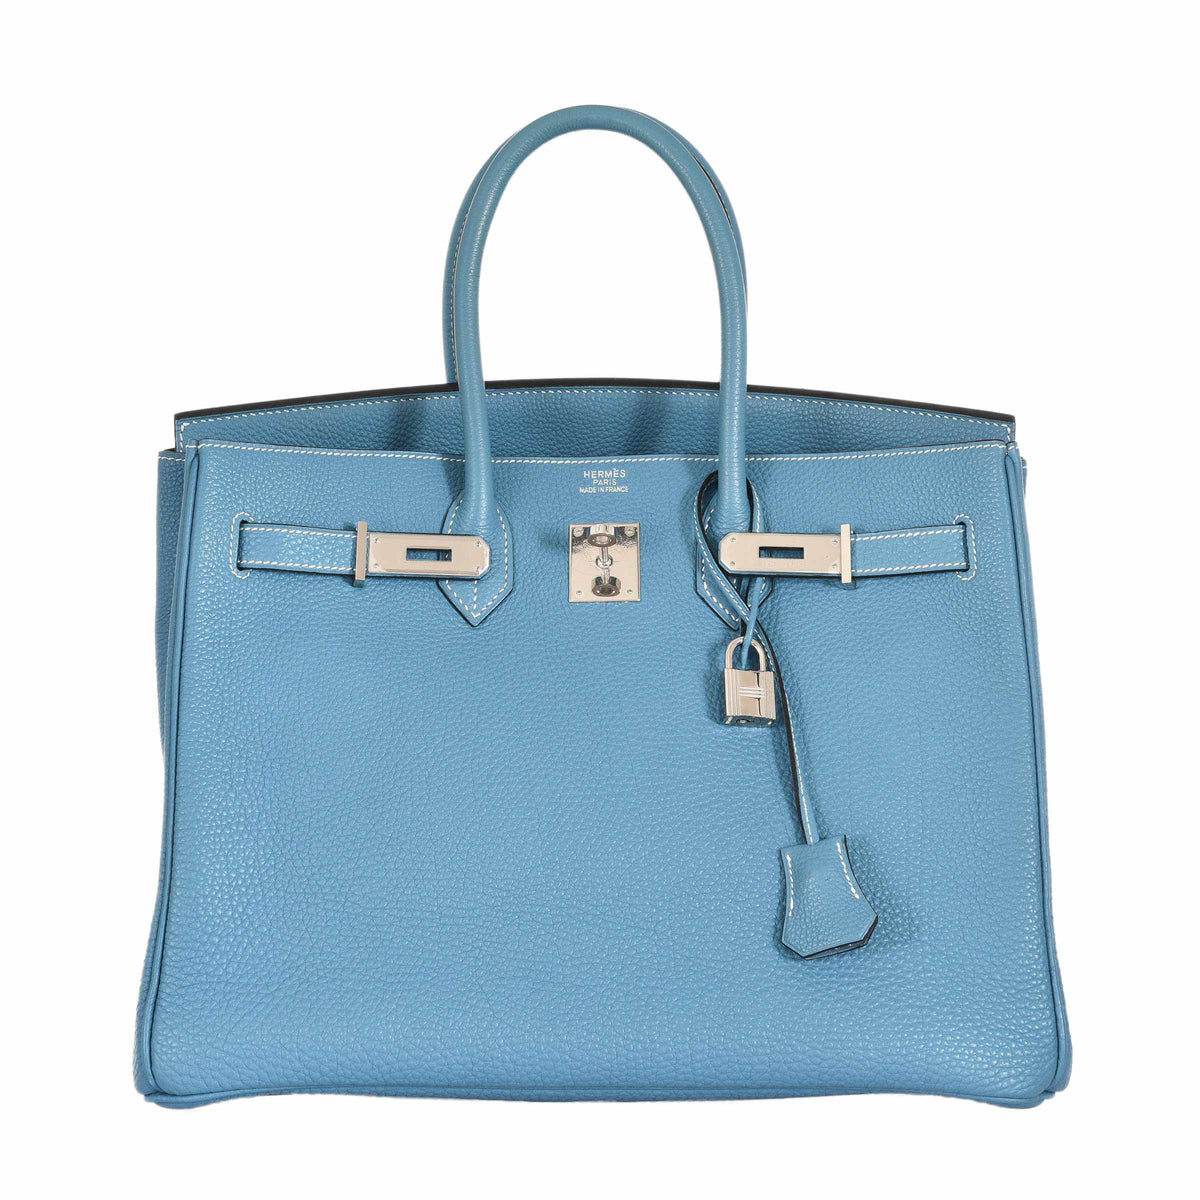 Hermes Birkin 35cm Collection - JaneFinds – Page 2